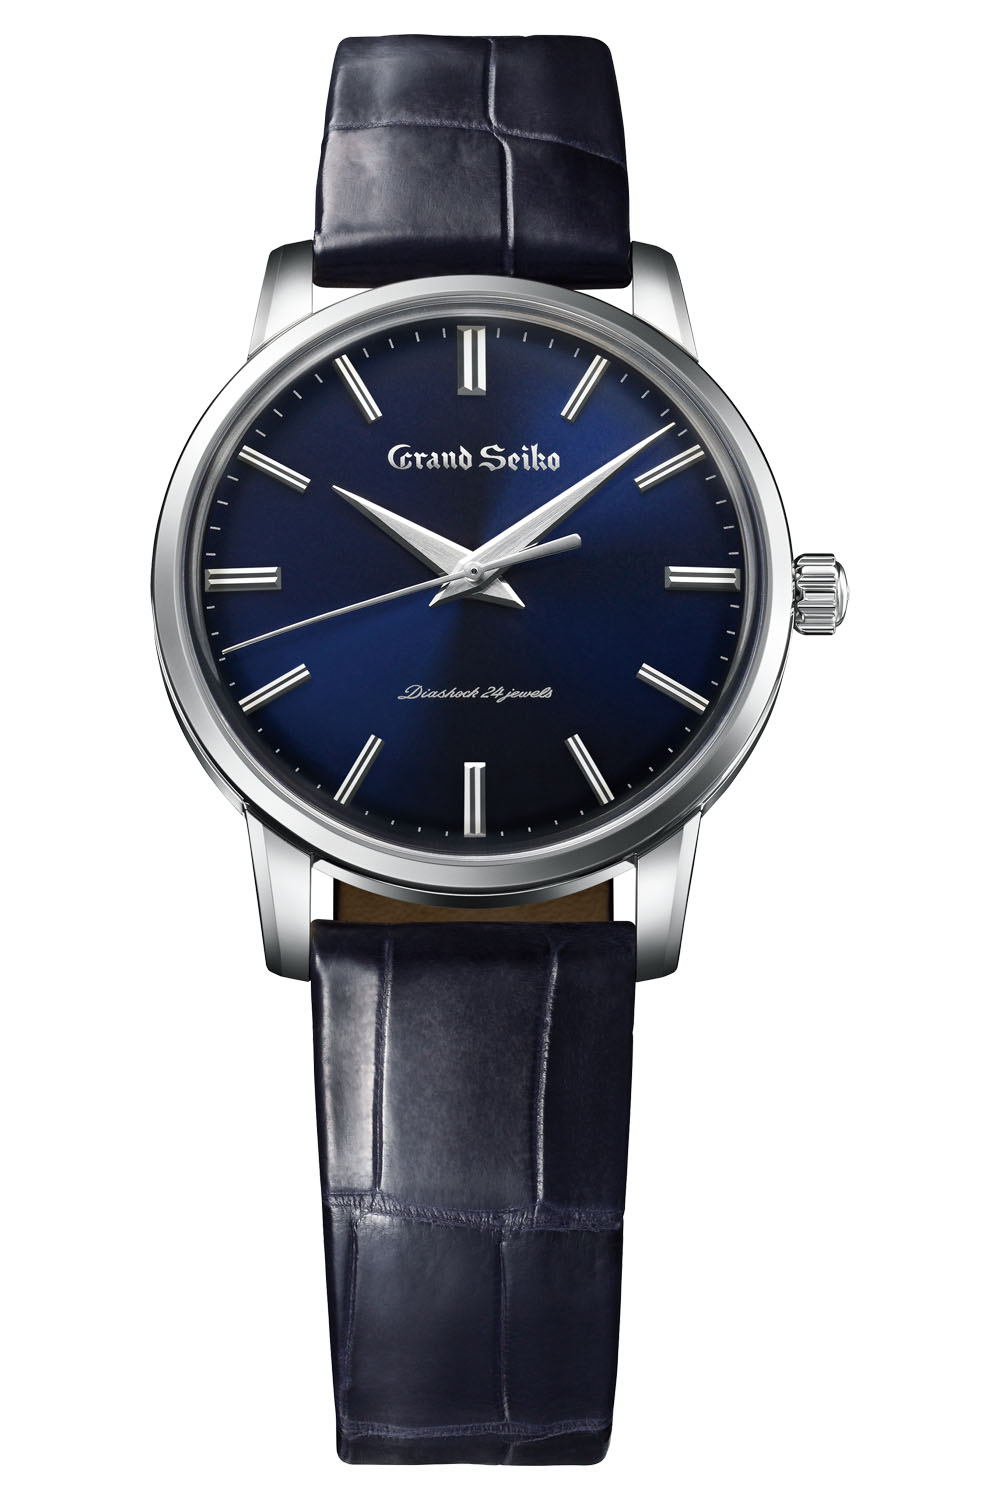 Grand Seiko 60th Anniversary Re-Creation of the first 1960 - SBGW259